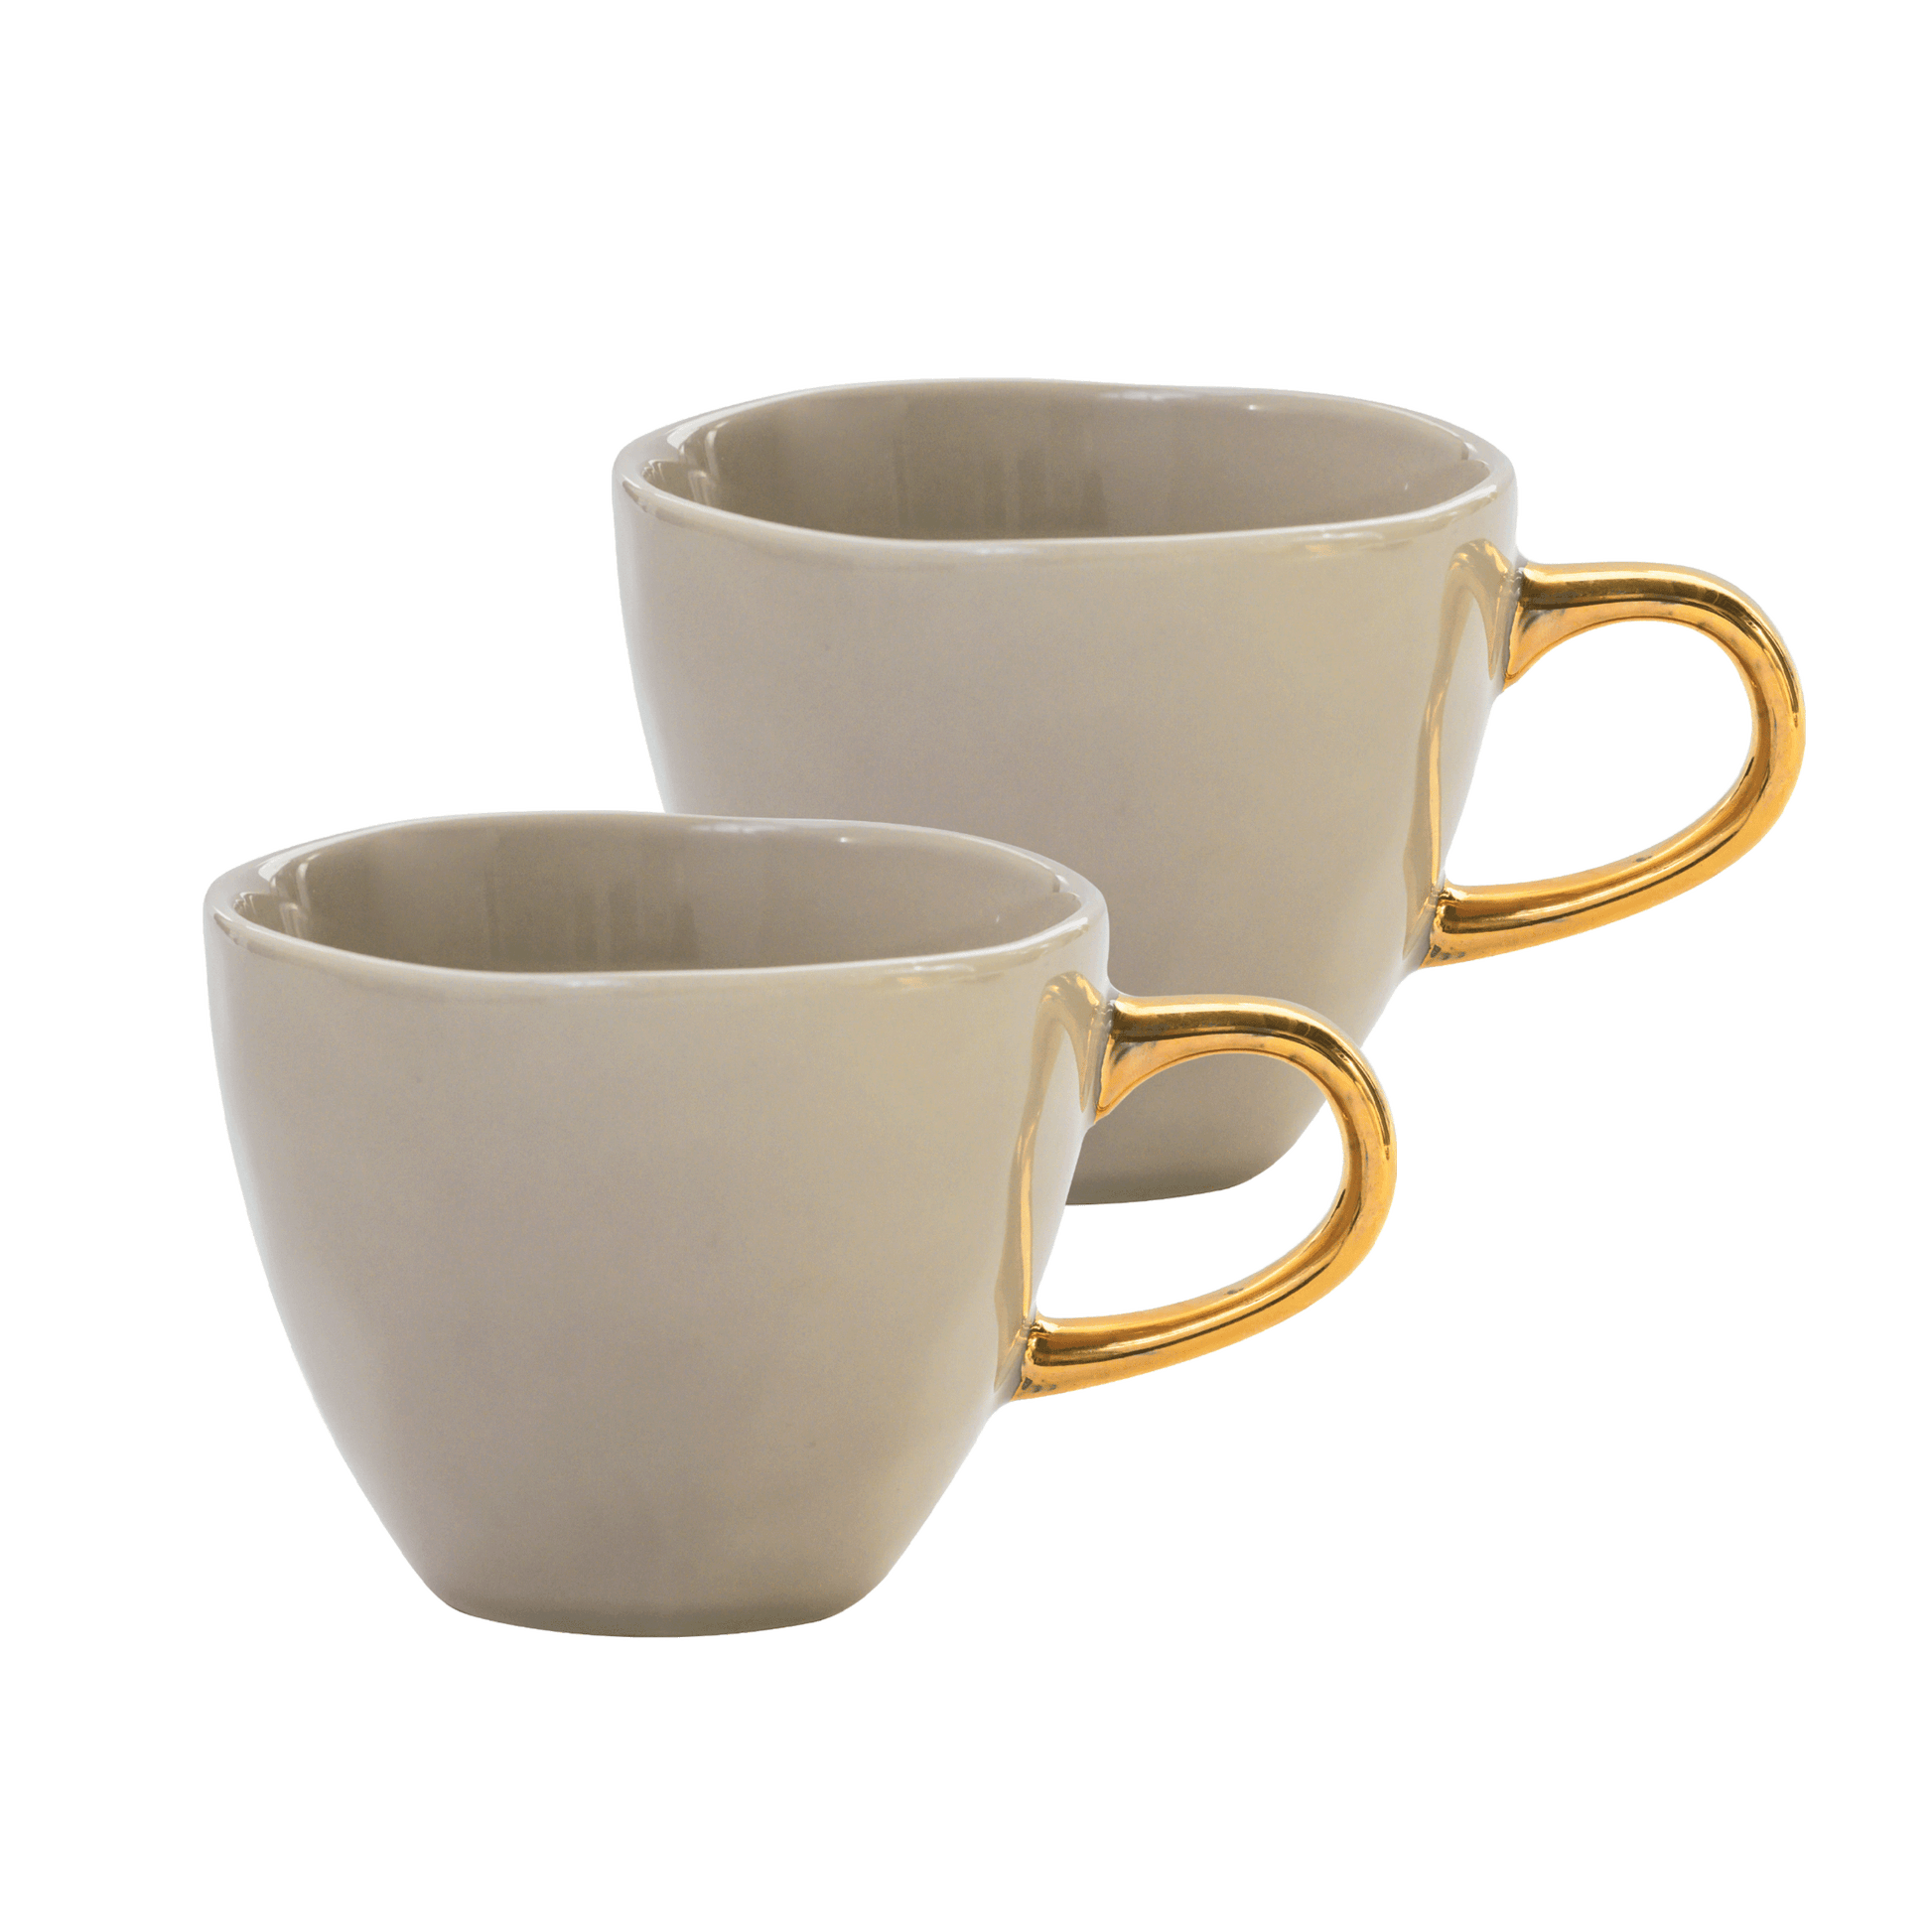 Good Morning Cup Mini s/2 in gift pack, Gray morn - Urban Nature Culture